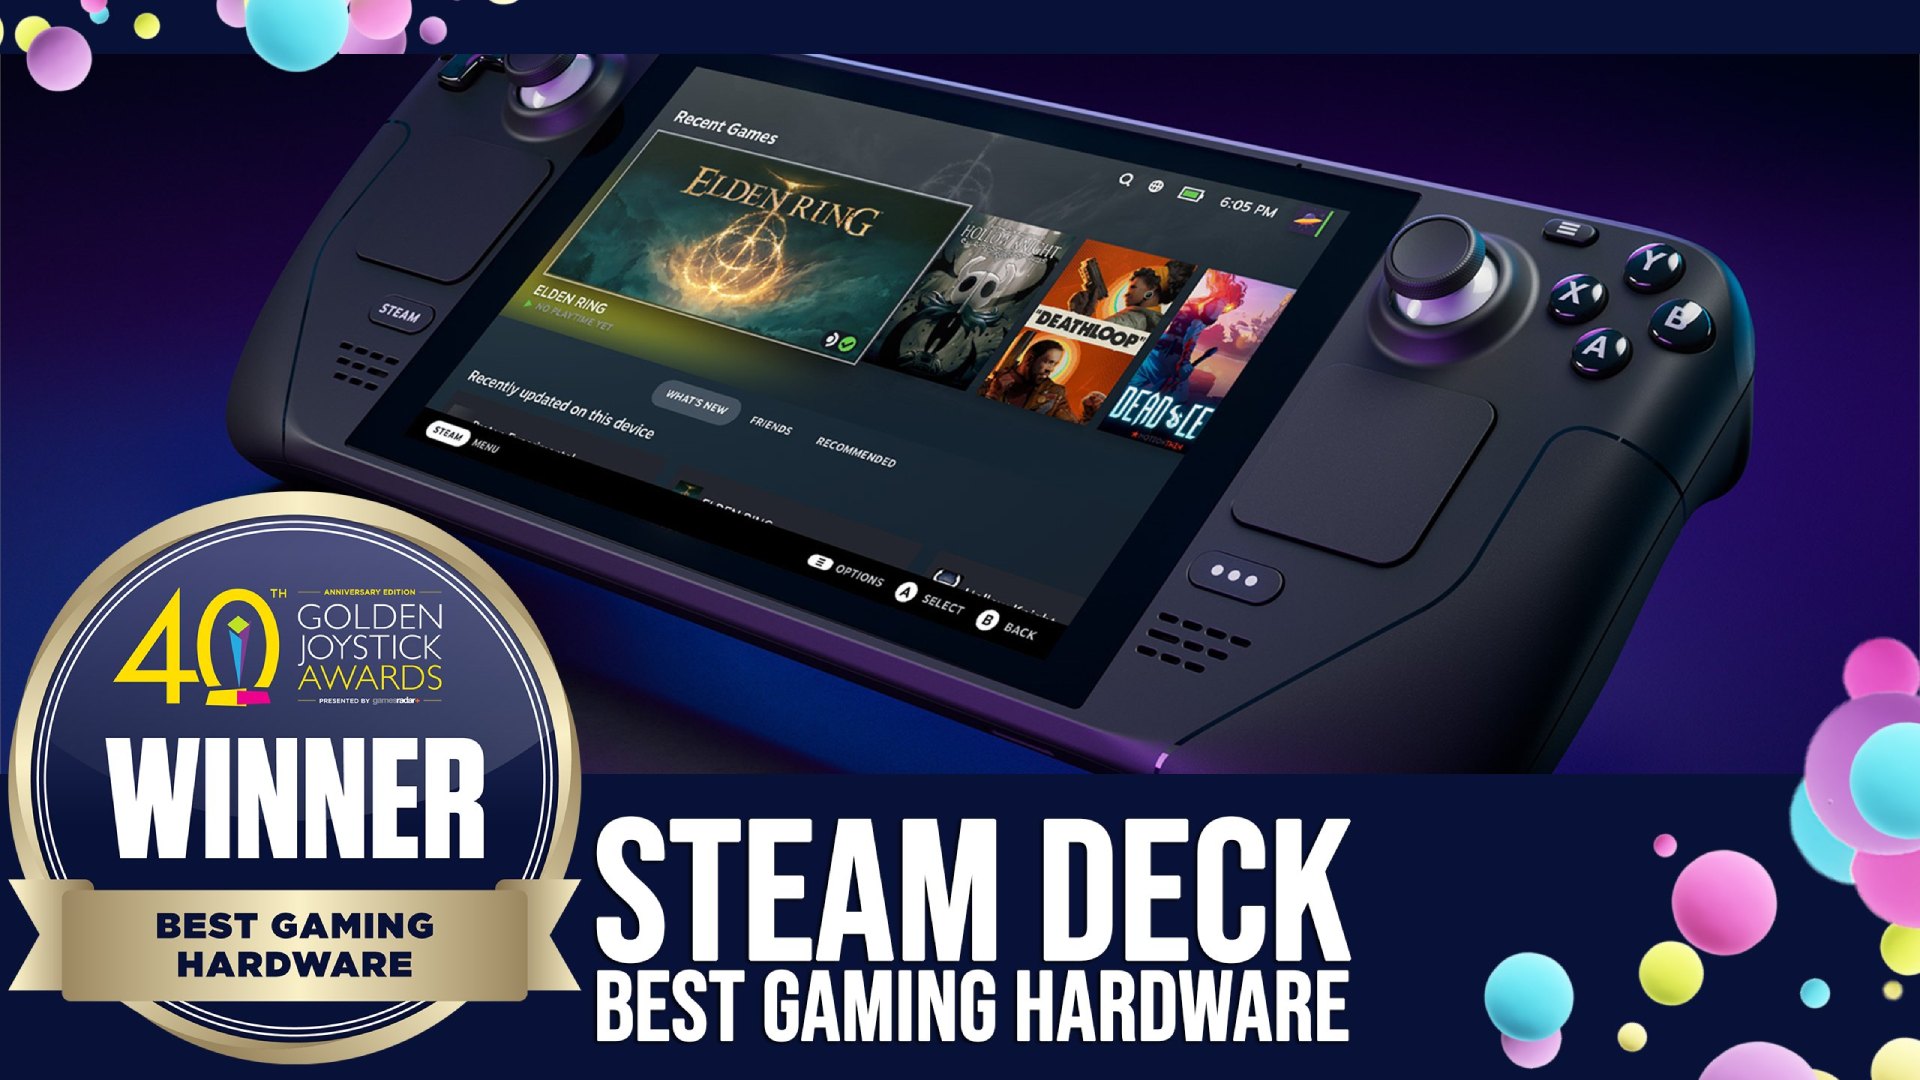 Steam Deck Golden Joystick awards graphic with handheld and event logo on left